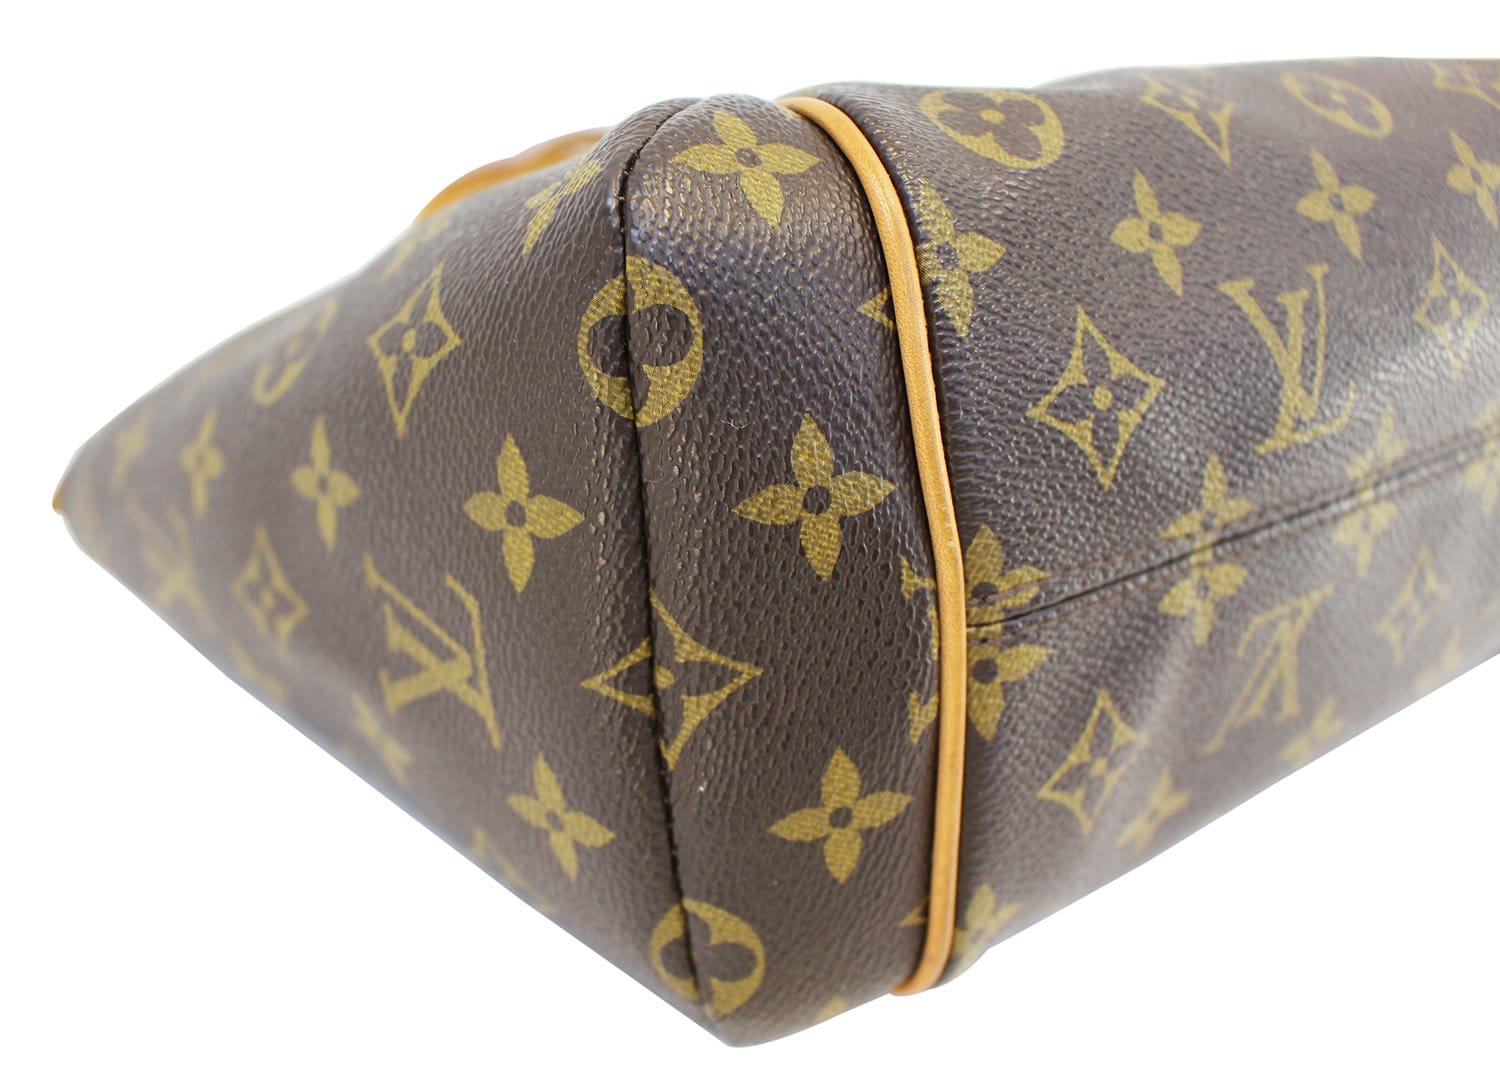 Louis Vuitton Totally PM Monogram Tote Shoulder Bag *Pre-Owned* Free  Shipping